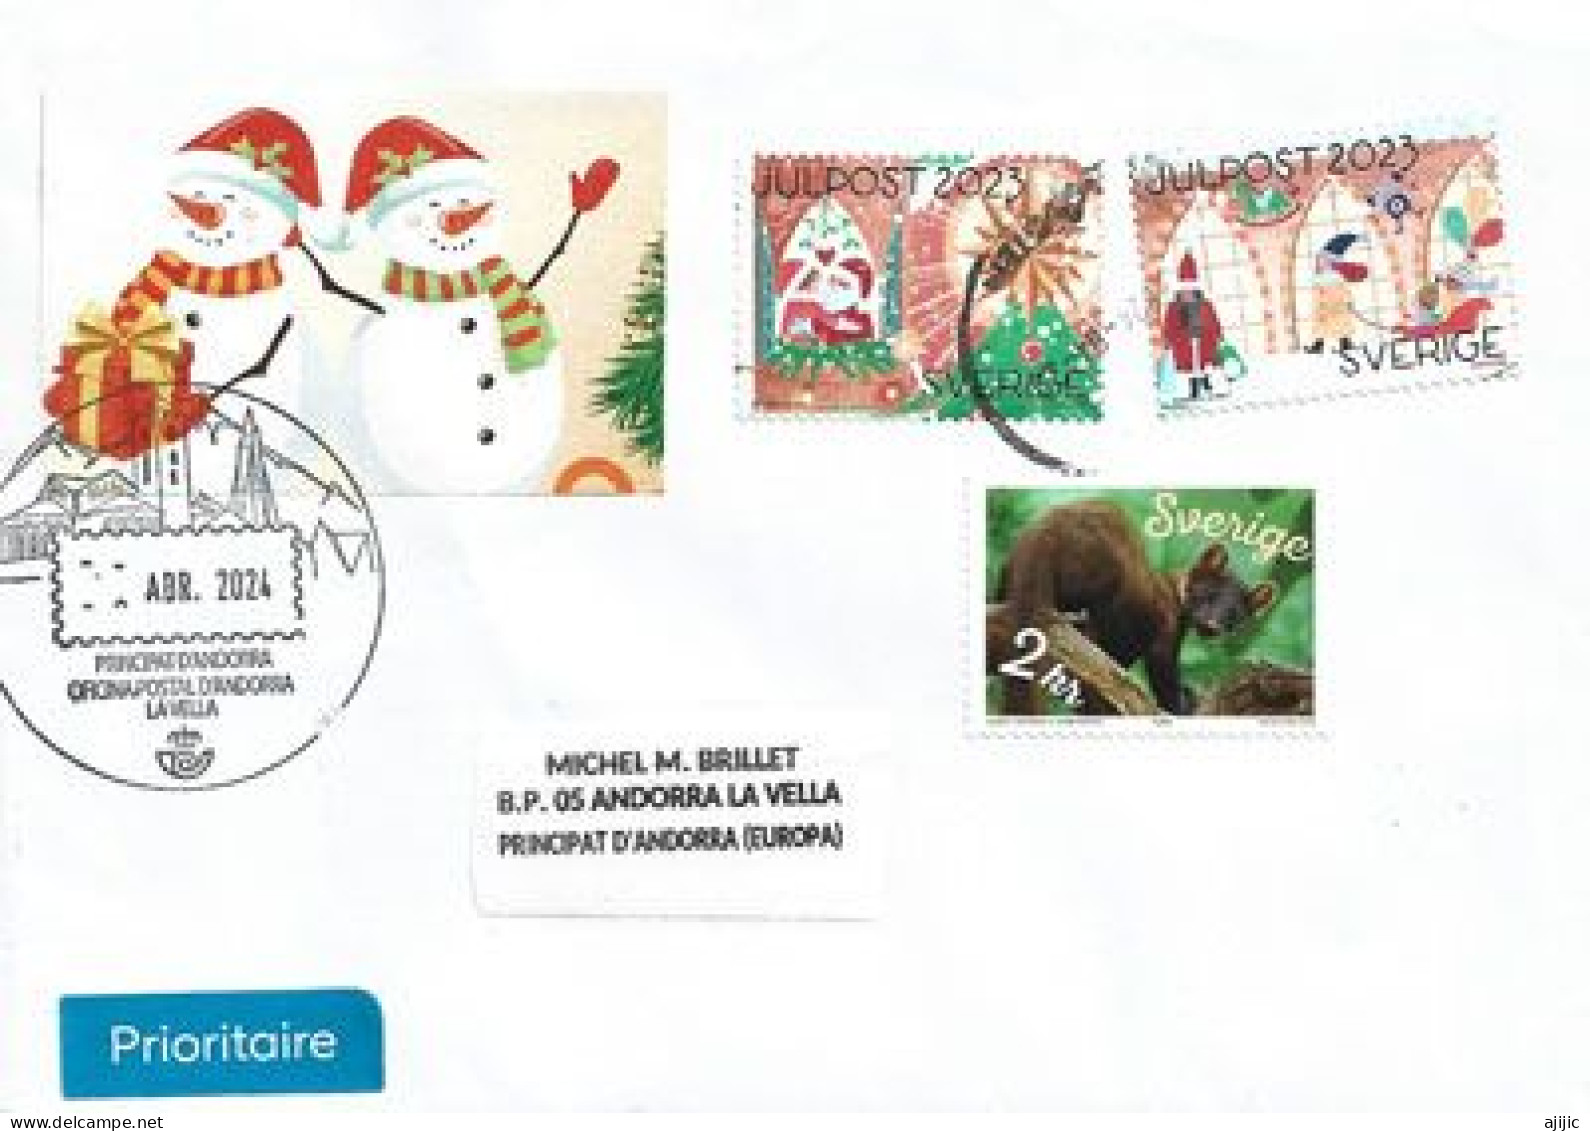 2024: Sweden. Julpost ('Christmas Mail') Letter From Sweden To Andorra,with Arrival Postmark - Covers & Documents